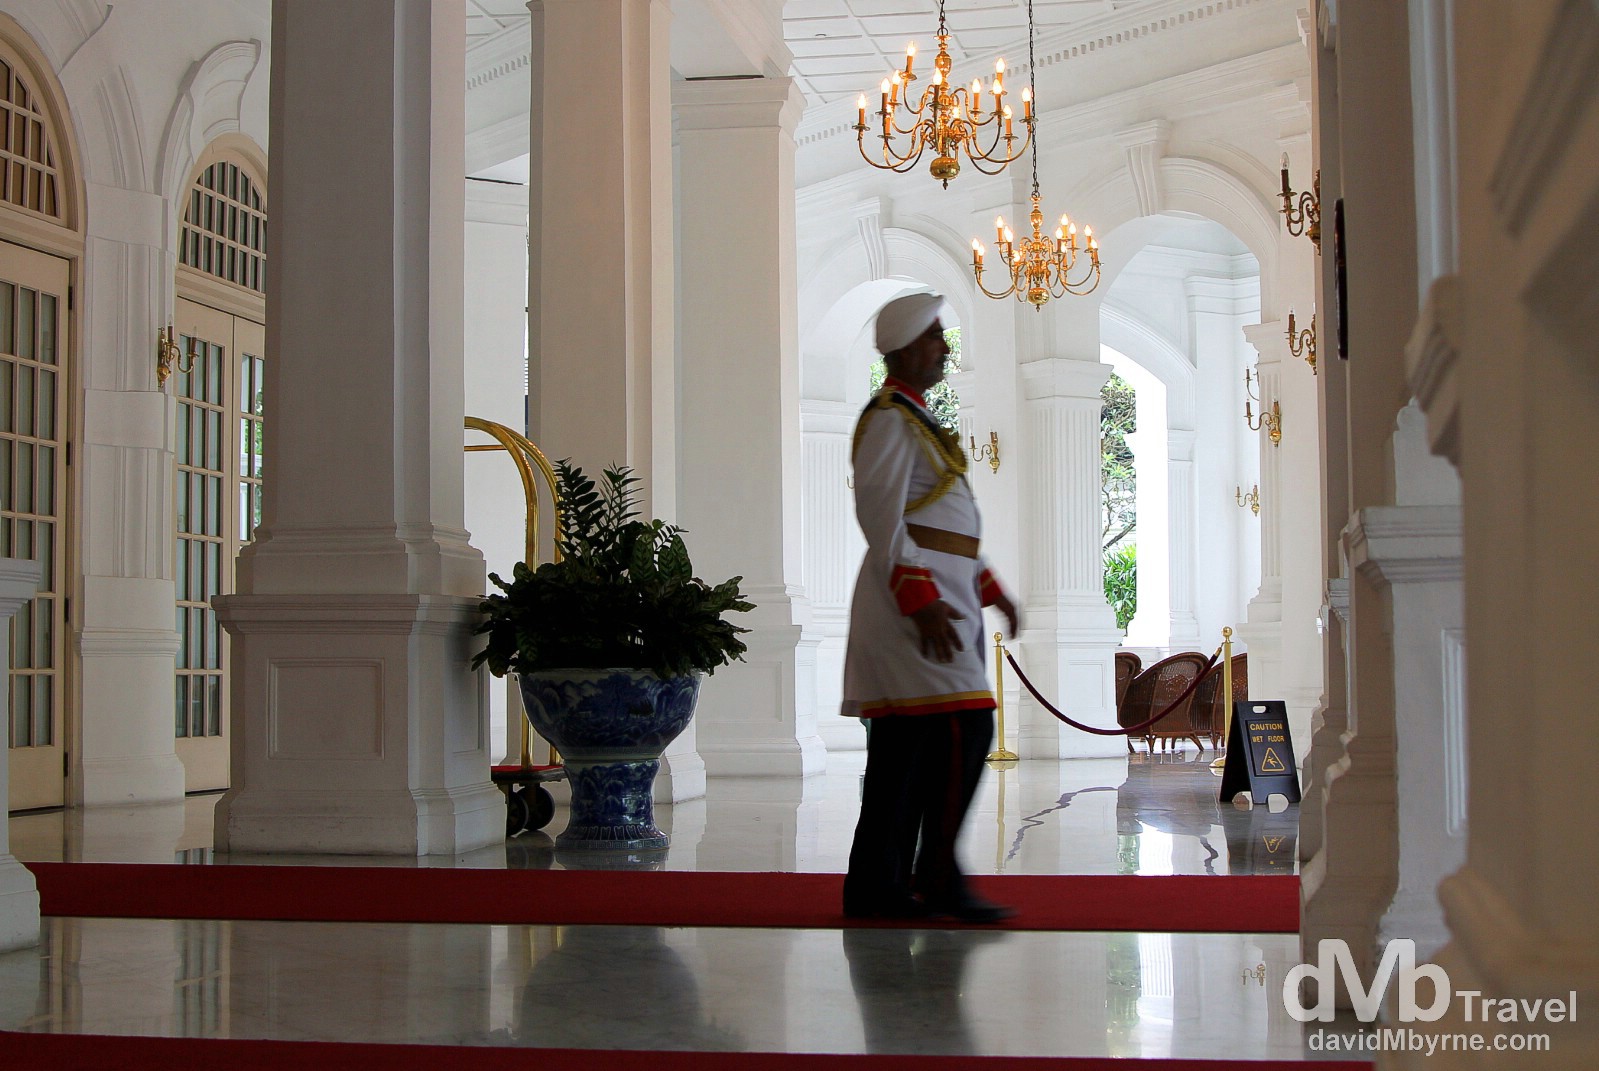 A doorman at the lobby entrance to Raffles Hotel, Singapore. A Singaporean institution & colonial opulence personified, the regal Raffles Hotel opened as a modest 10-room bungalow in 1887 with the main building following in 1889. By the 1970's it had seen better days & was a shabby relic of its old, glamorous self. A major revamp in time for a 1991 reopening brought it back to something resembling its former glory. I spent an hour or so sniffing around and sticking my camera at white walls, arches, fancy gold chandeliers, polished marble floors, & rich people. It was fun. Raffles Hotel, Singapore. March 28th 2012.